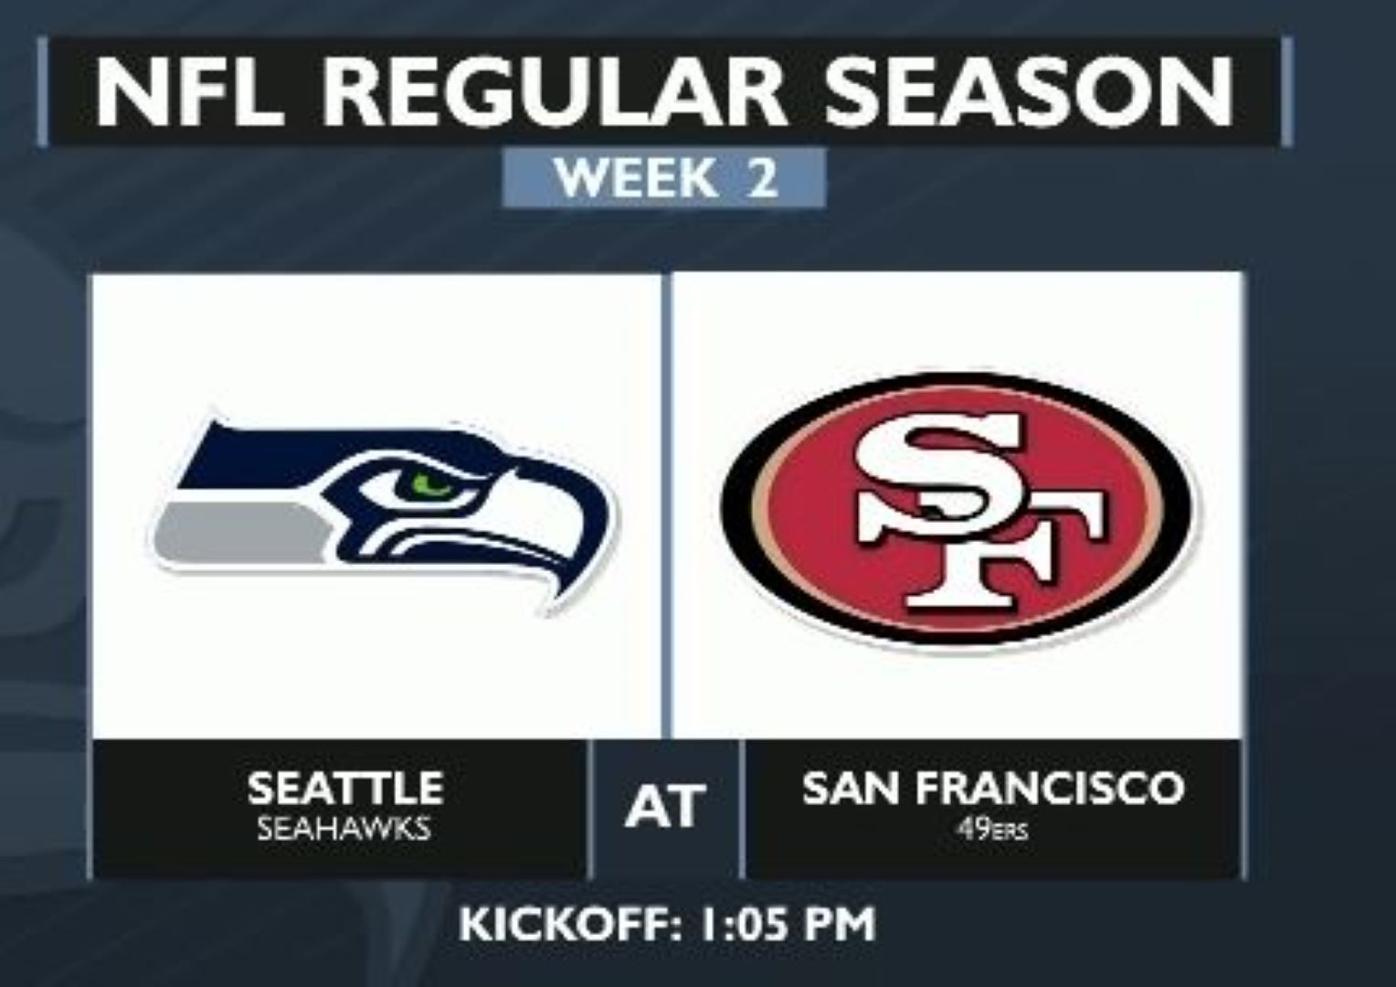 Seahawks look to continue winning ways against 49ers, Local News